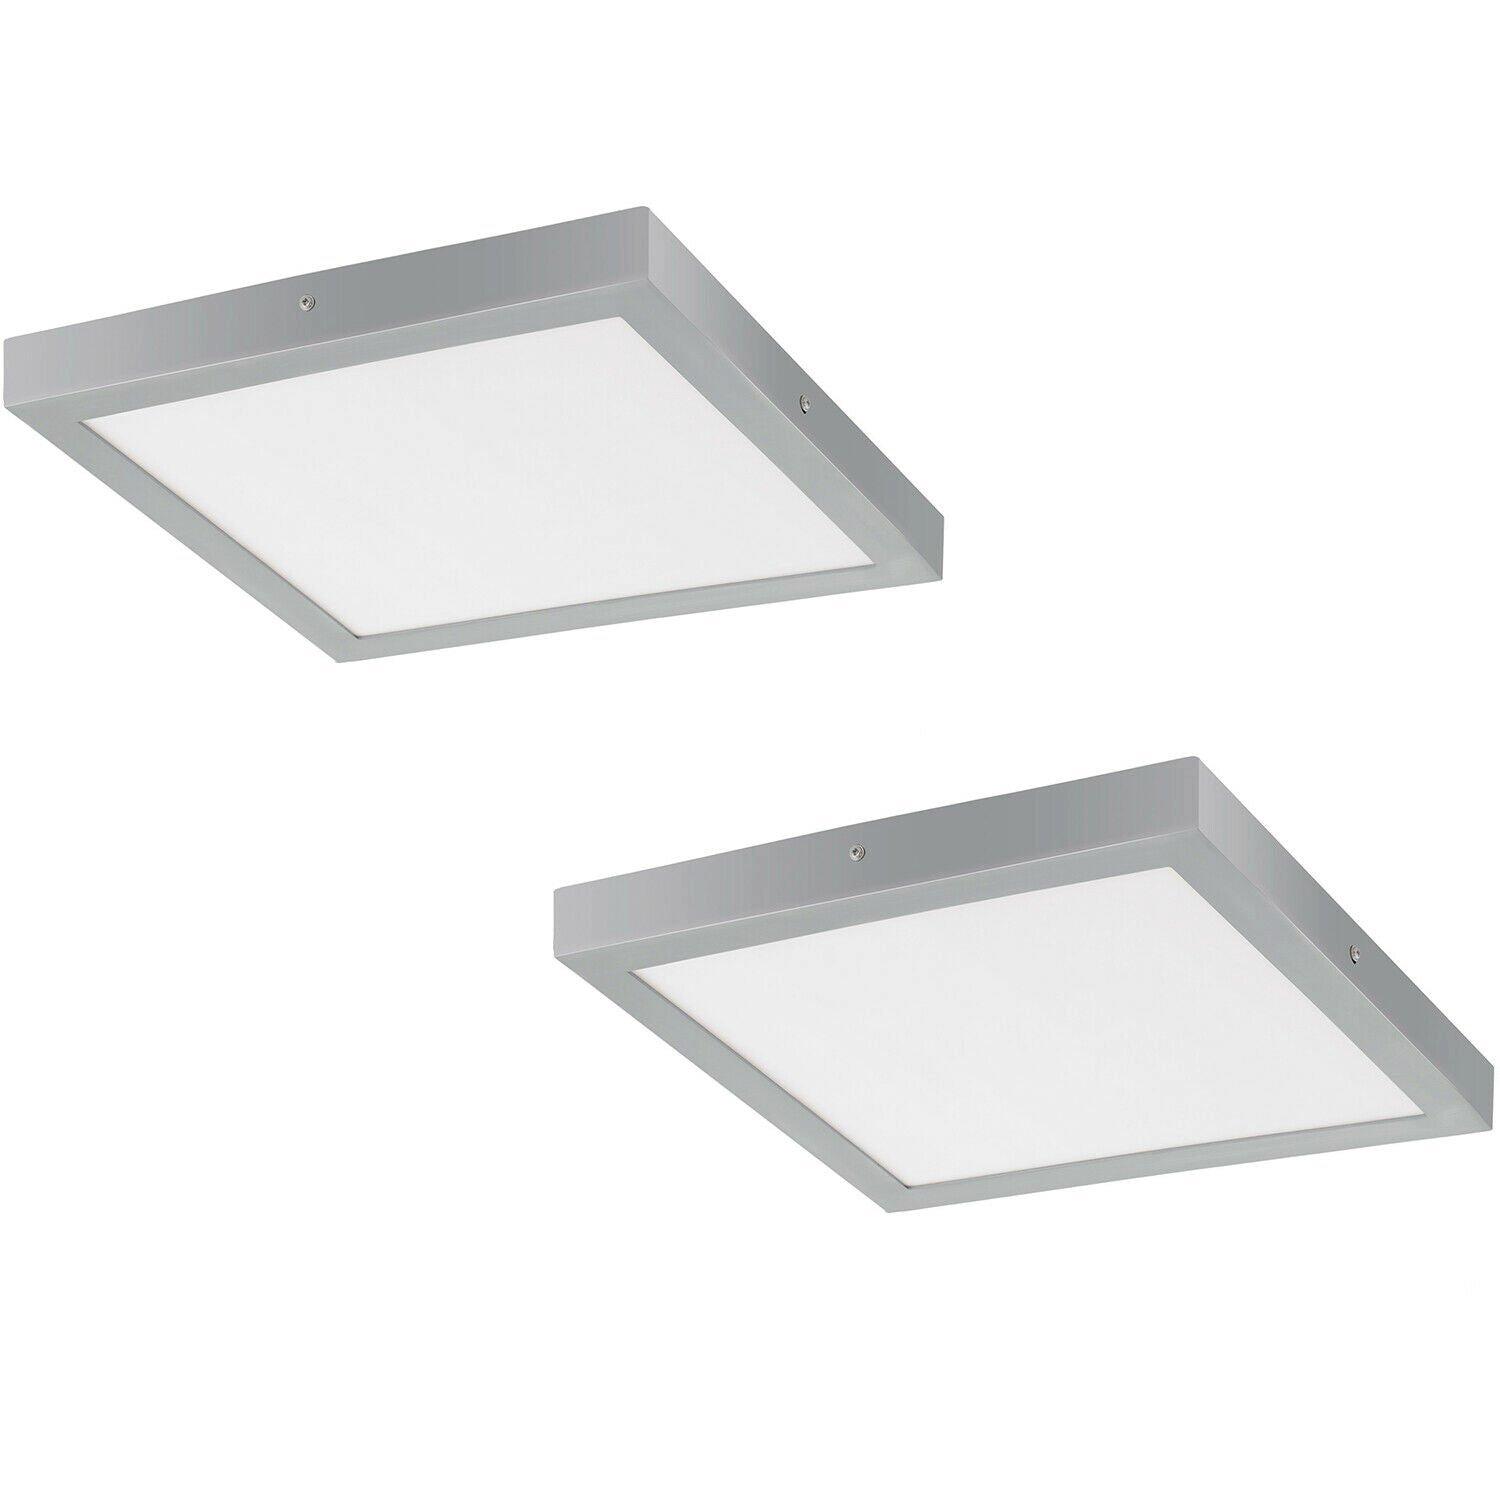 2 PACK Wall / Ceiling Light Silver 400mm Square Surface Mounted 25W LED 3000K